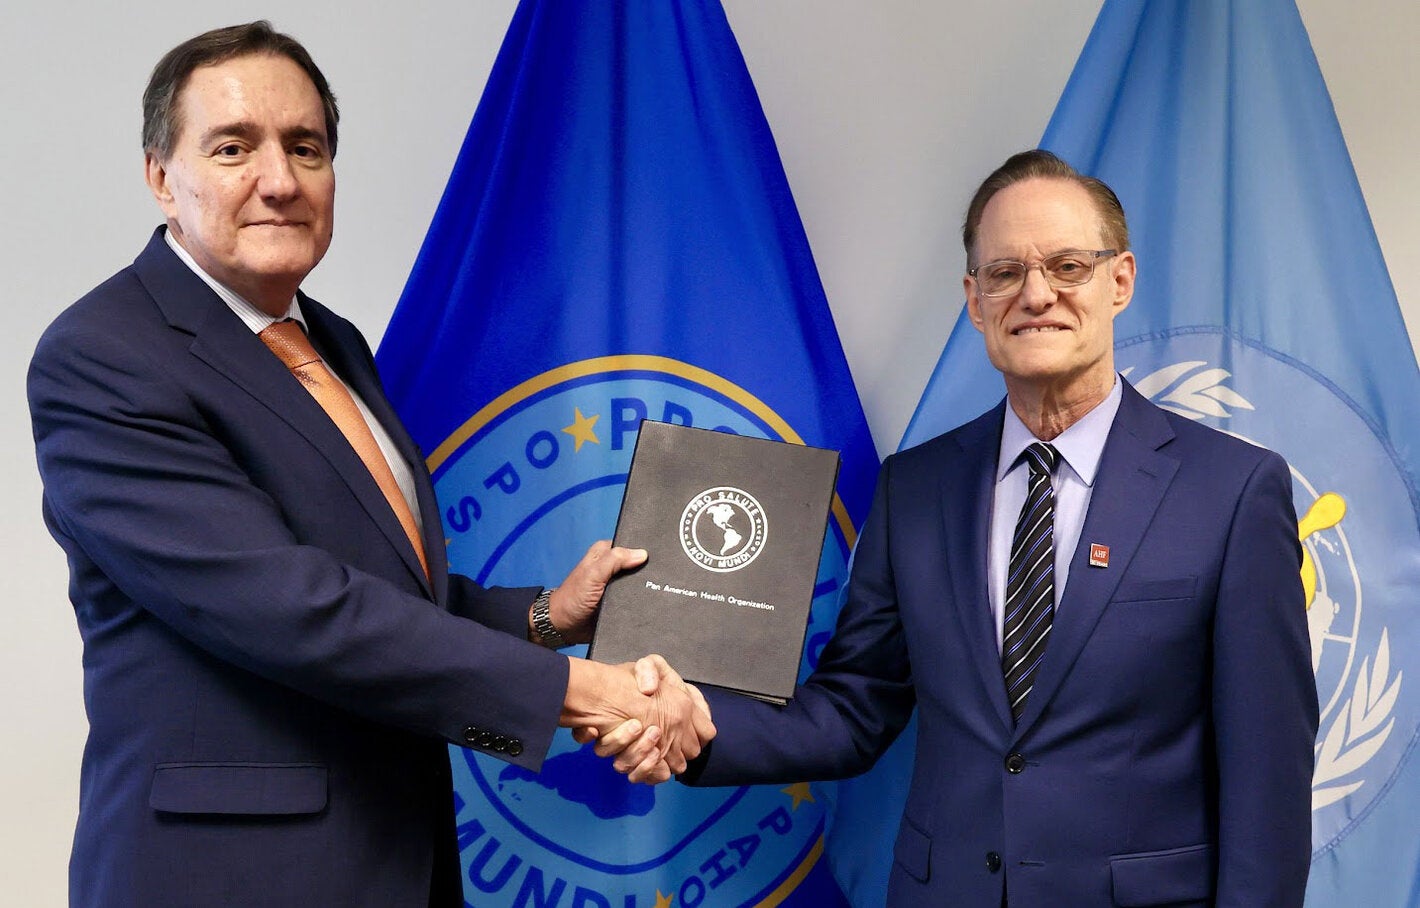 PAHO and AIDS Healthcare Foundation to collaborate on elimination of HIV/AIDS, tuberculosis, and other infectious diseases in Latin America and the Caribbean